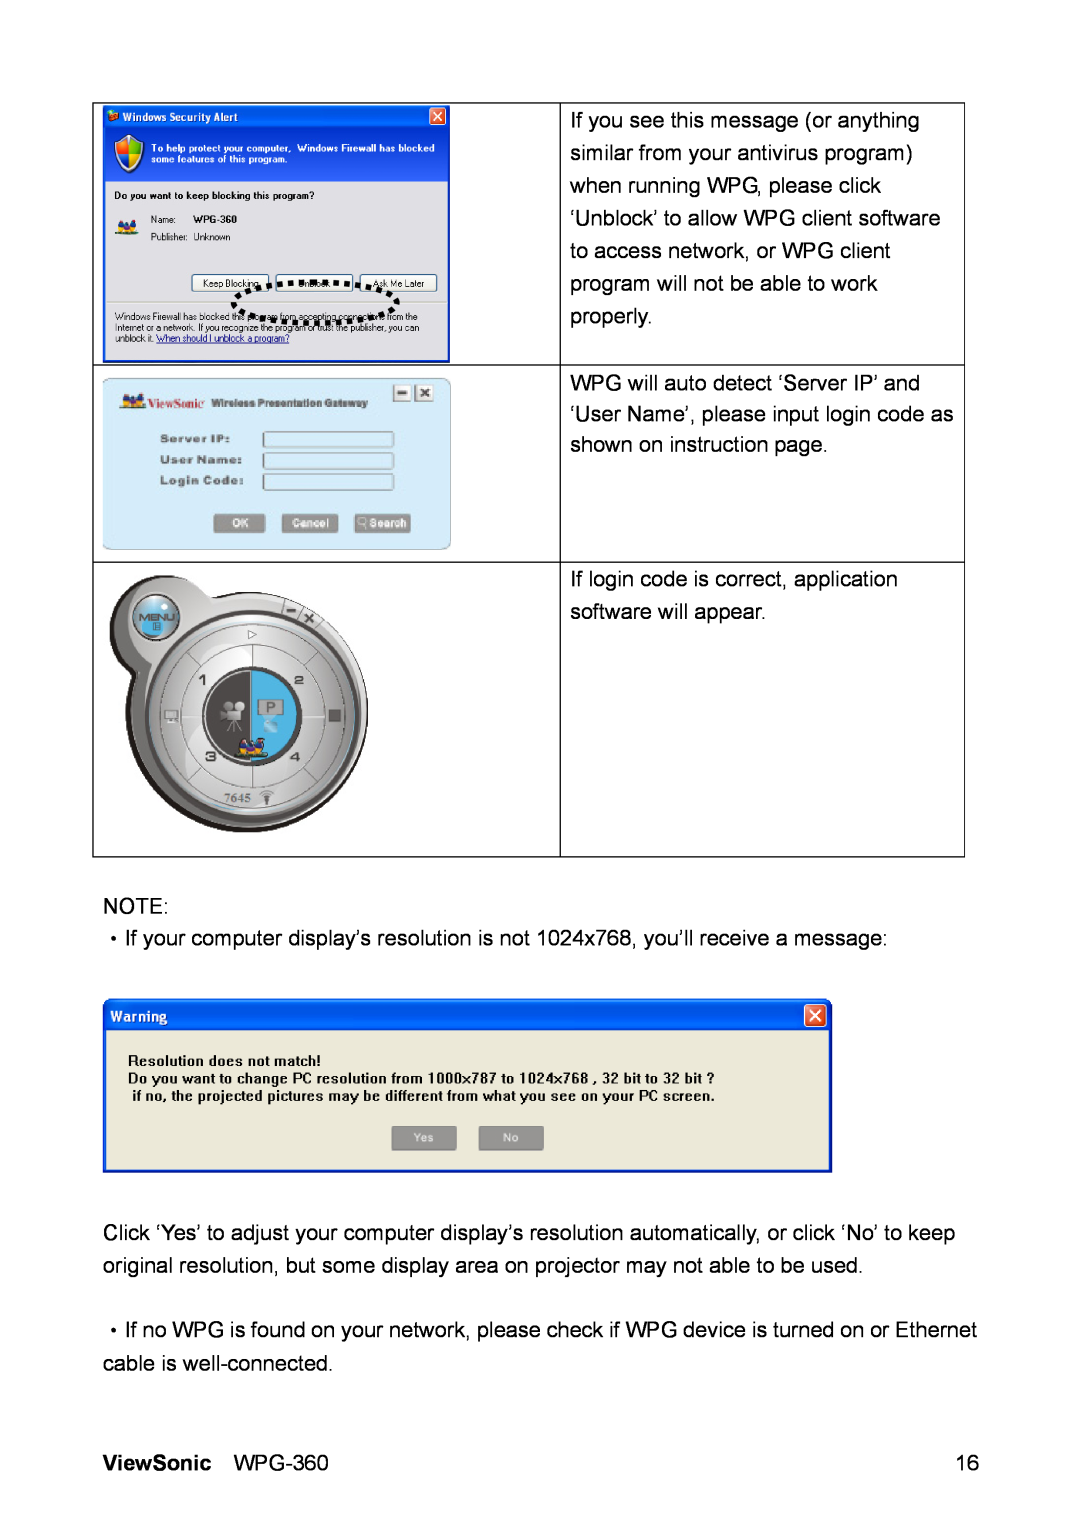 ViewSonic manual If login code is correct, application software will appear, ViewSonic WPG-360 